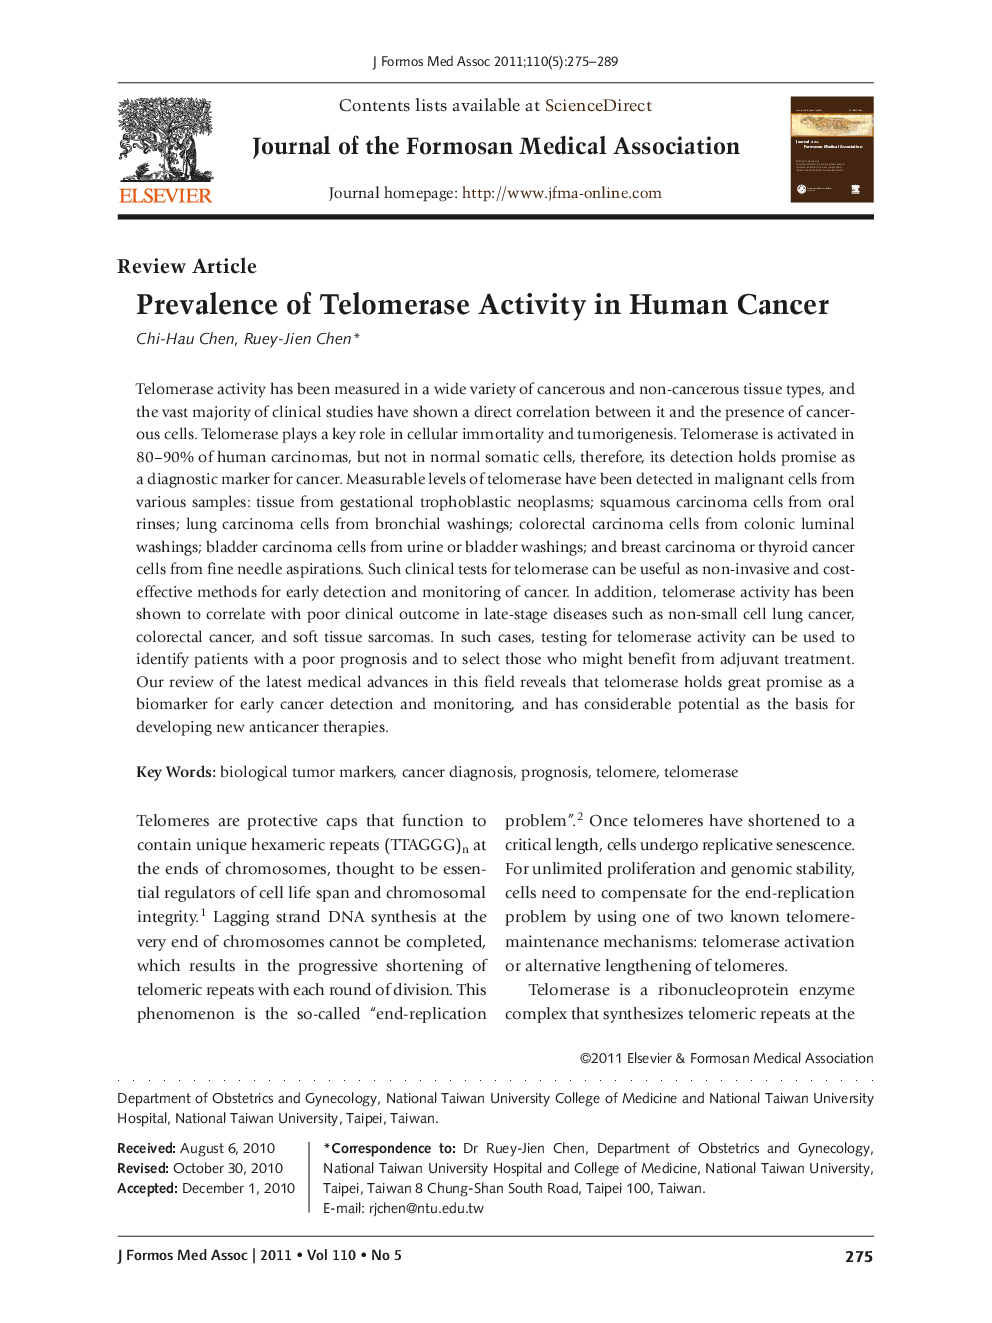 Prevalence of Telomerase Activity in Human Cancer